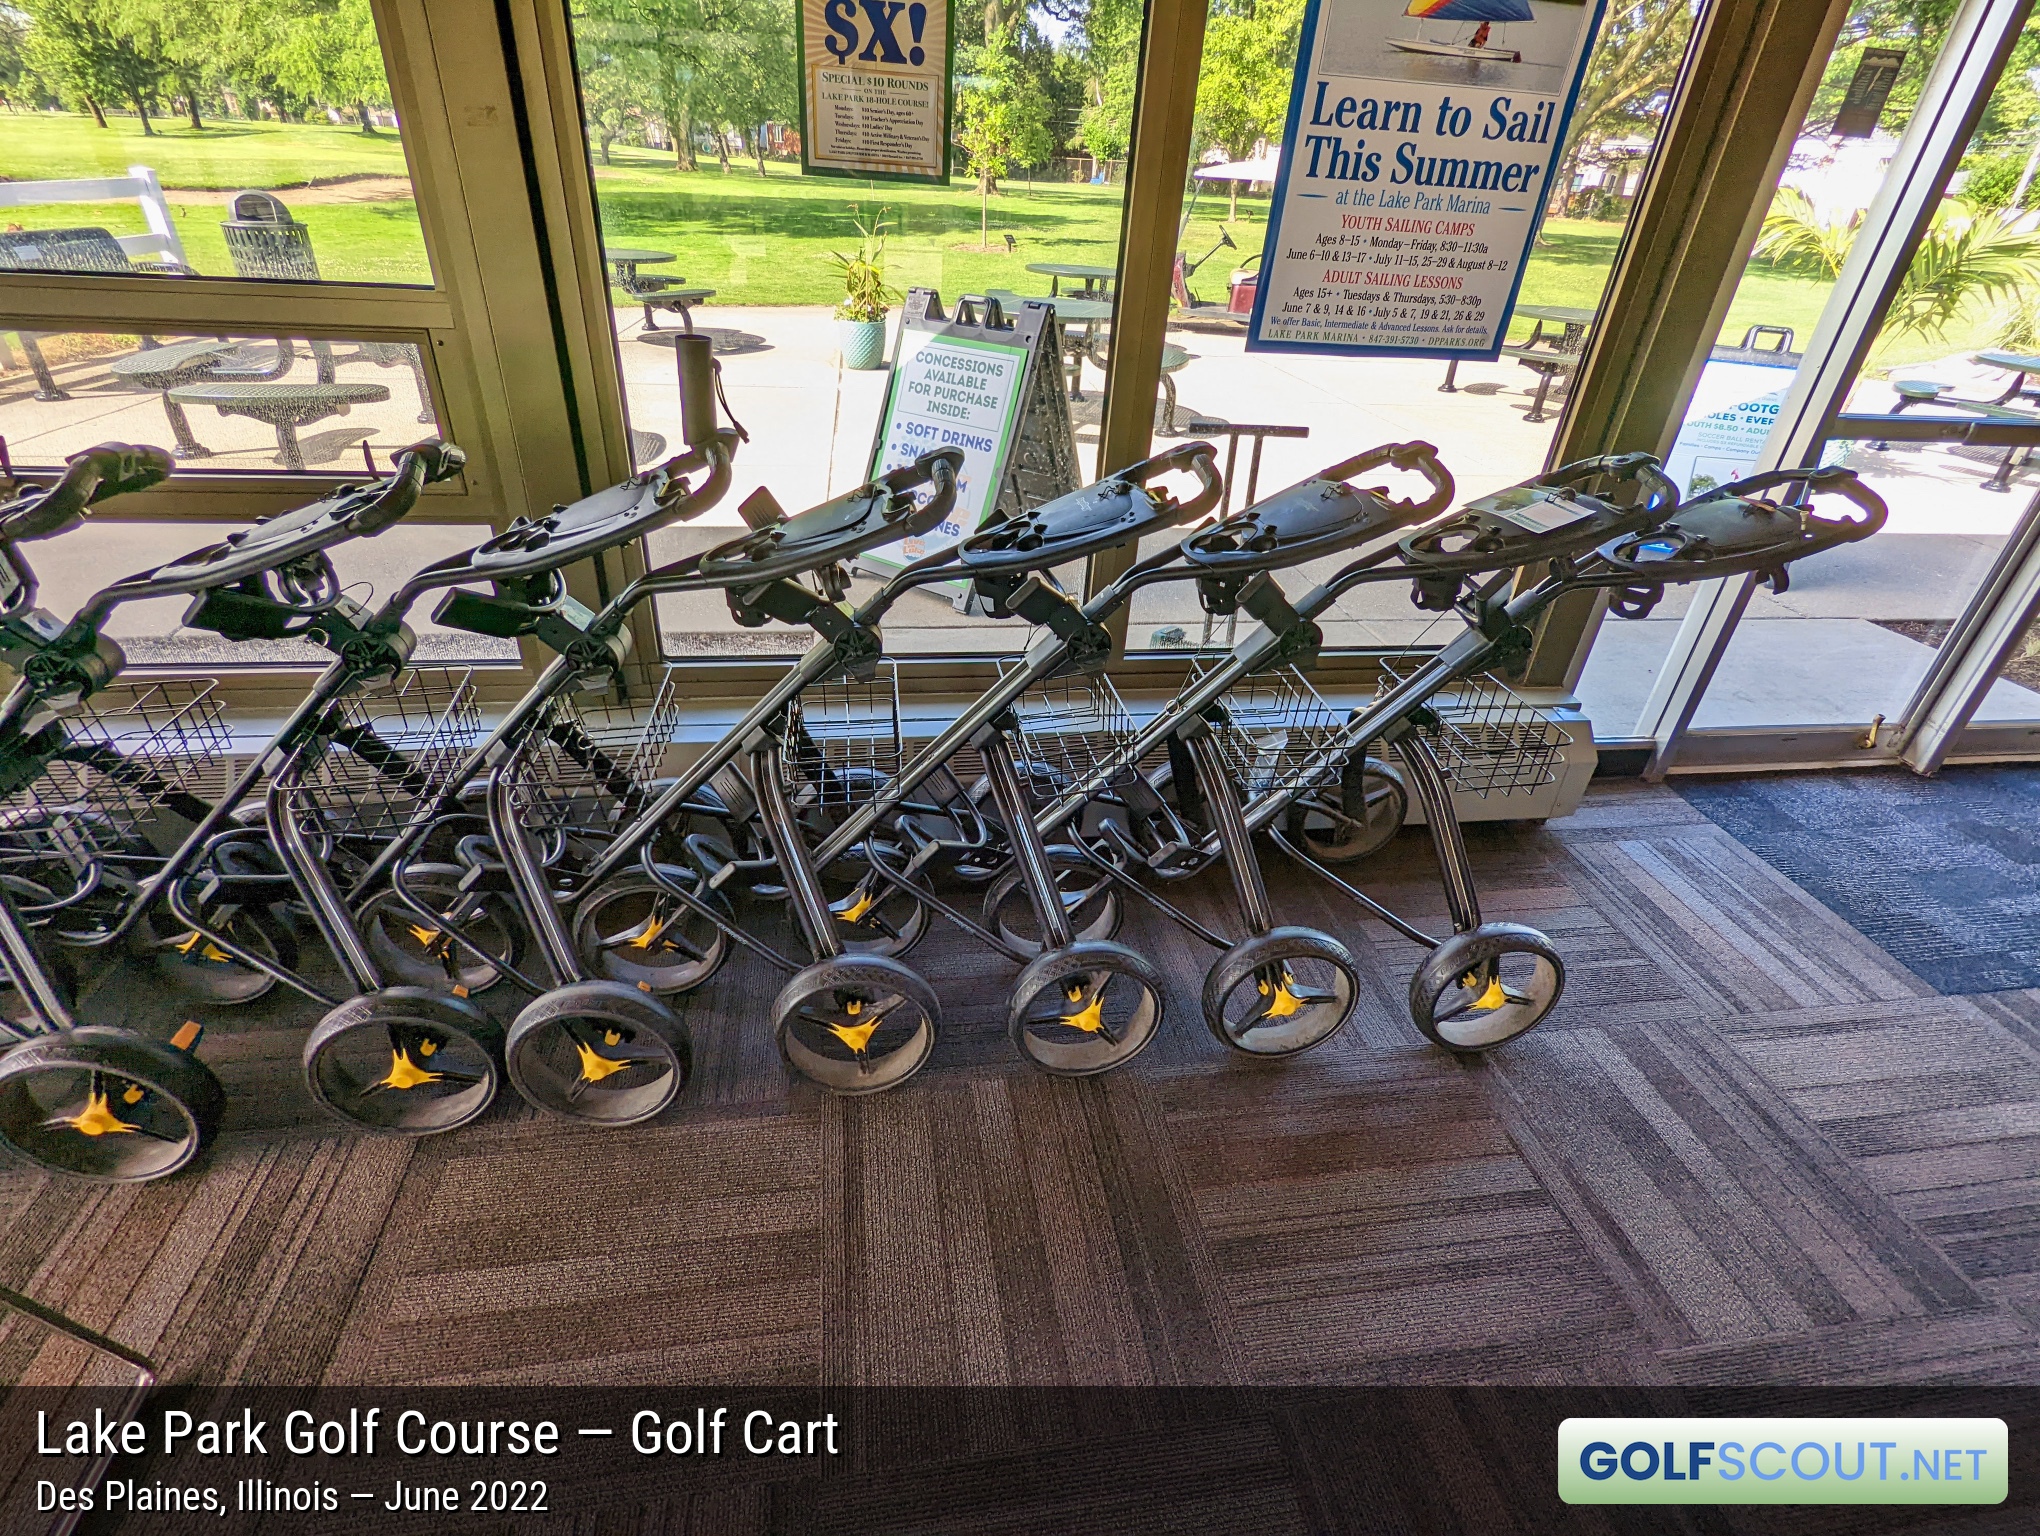 Photo of the golf carts at Lake Park Golf Course in Des Plaines, Illinois. 